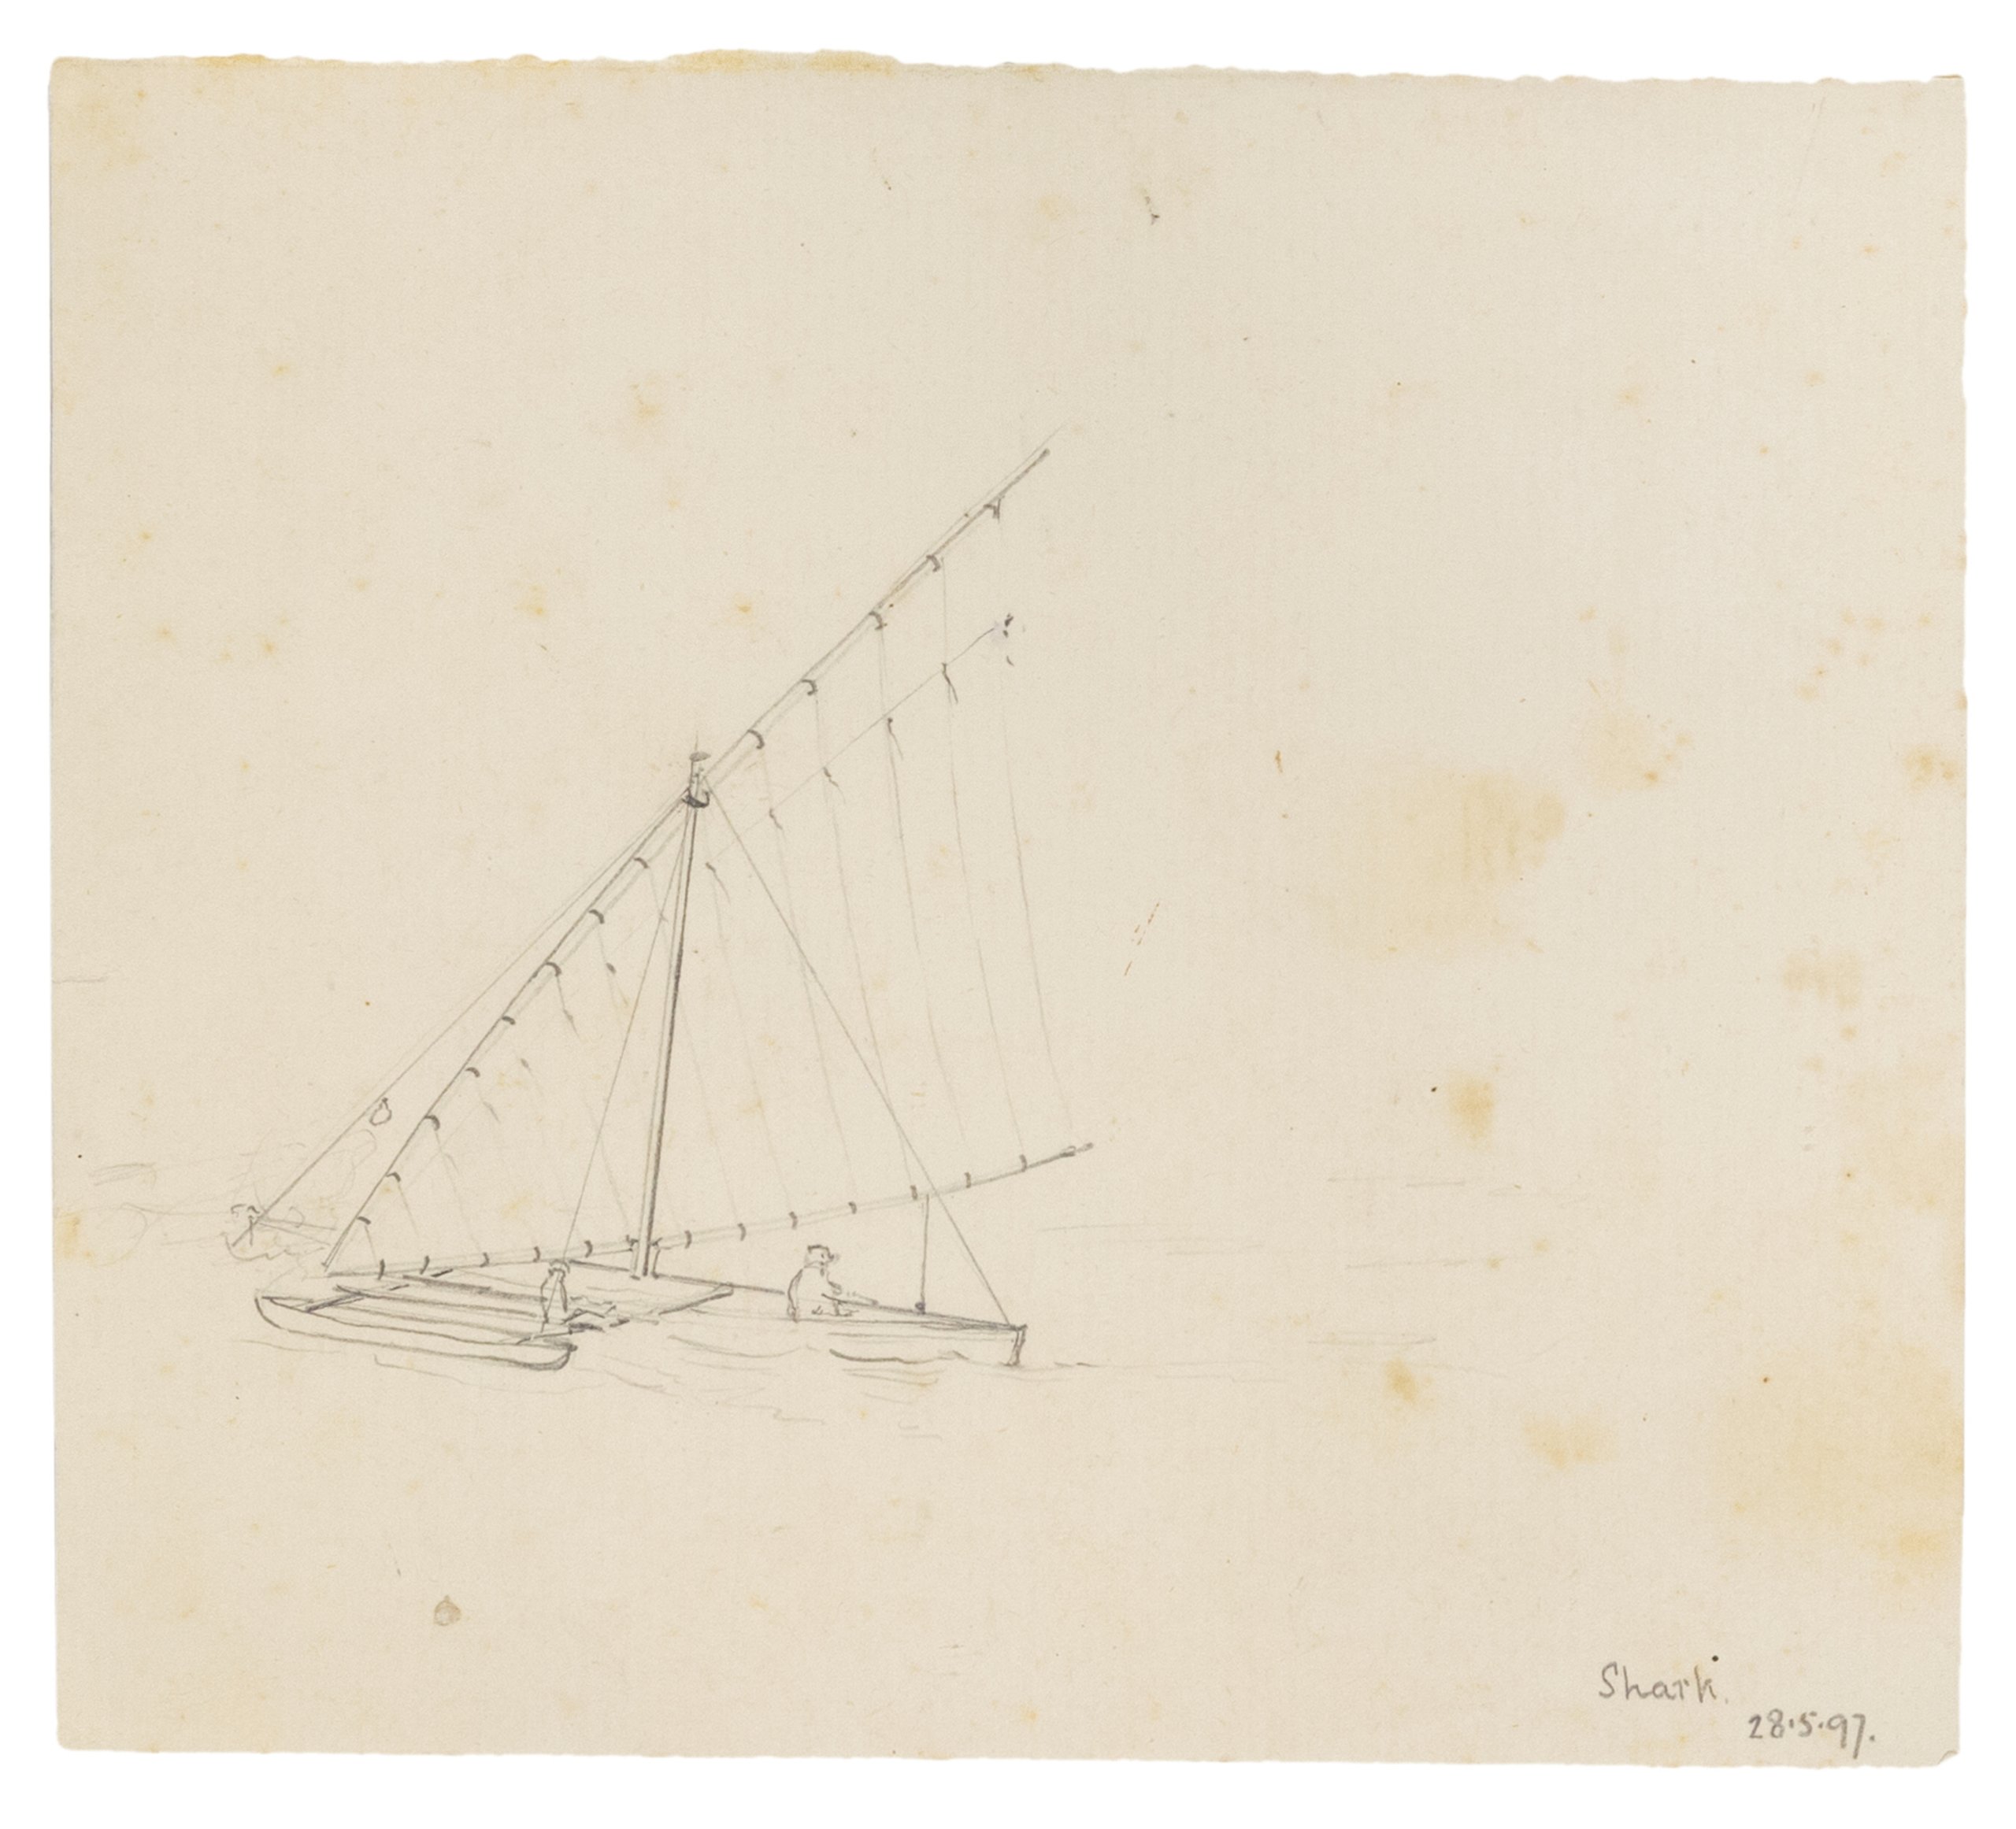 'Shark' drawing by Lawrence Hargrave